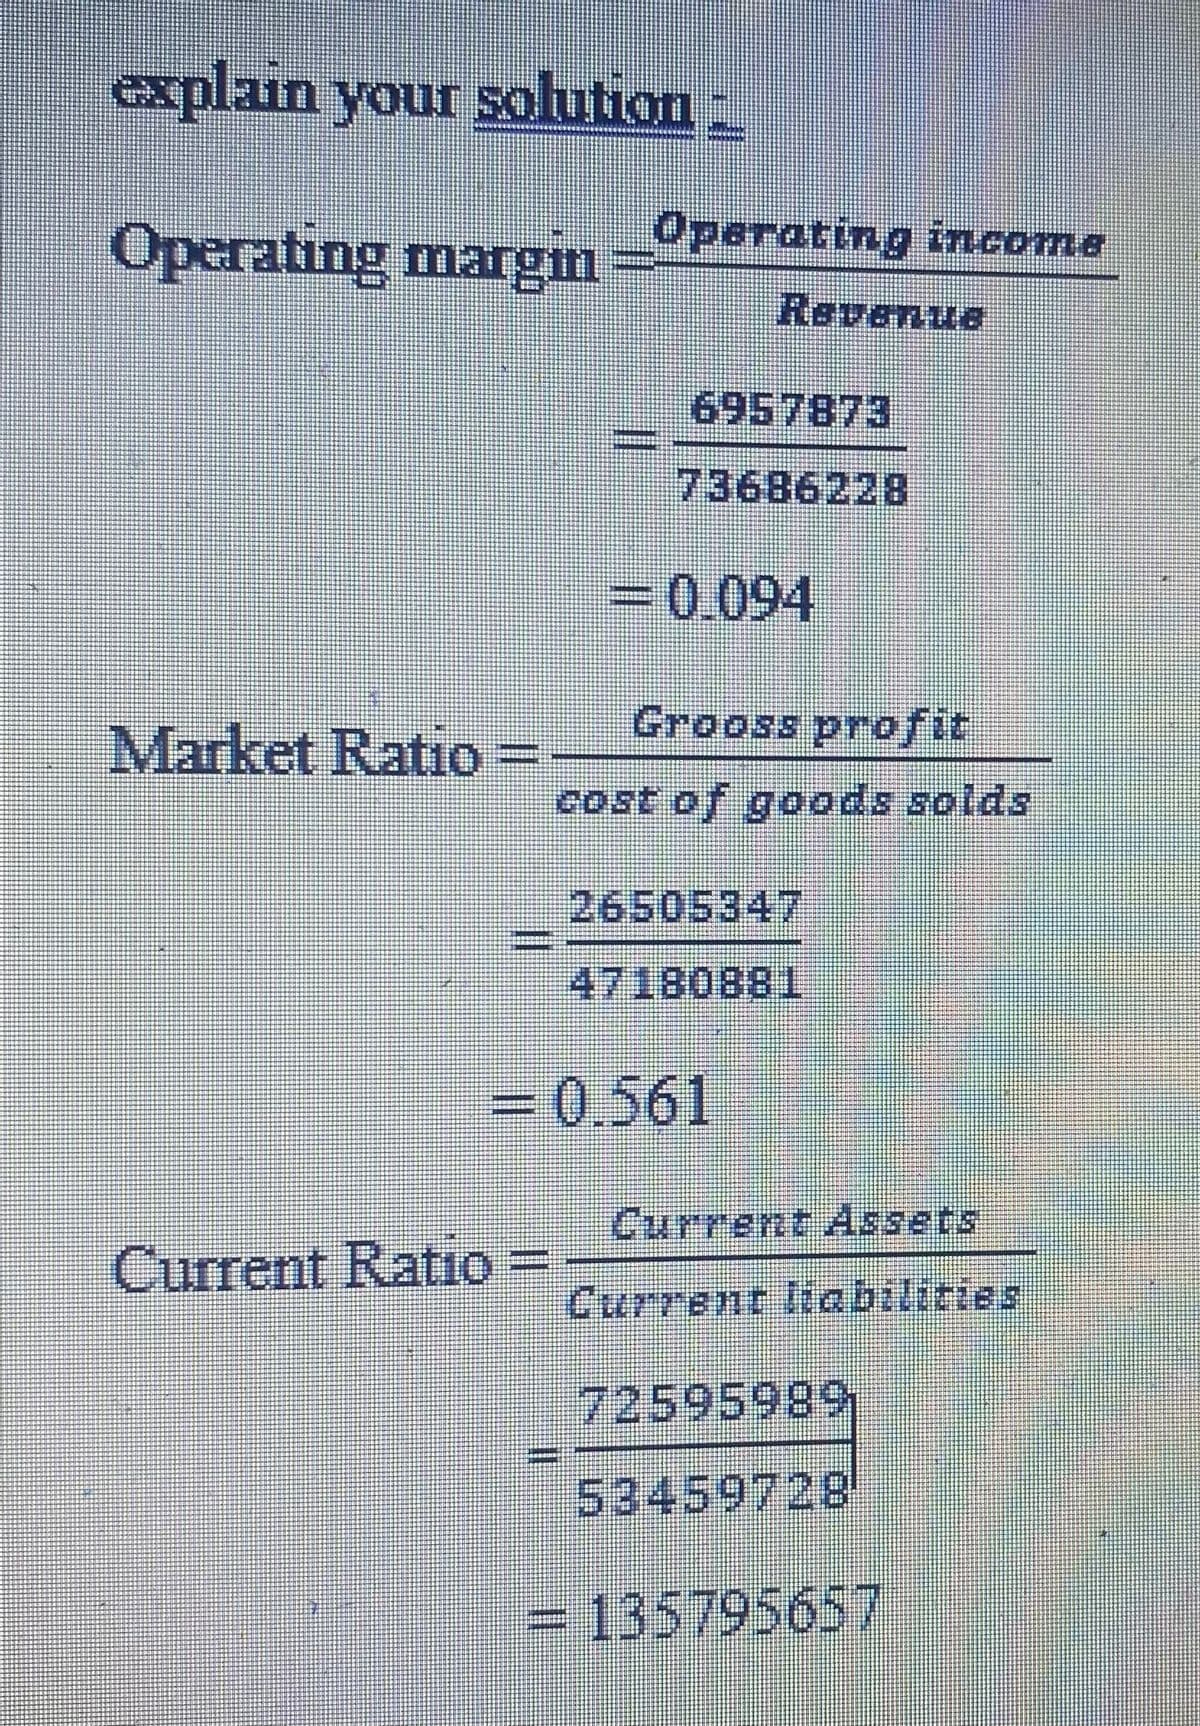 explain your solution
Operating margin
Market Ratio
Operating income
Current Ratio =
Ravenue
6957873
73686228
= 0.094
Grooss profit
cost of goods solds
= 0.561
26505347
47180881
Current Assets
Current liabilities
72595989
53459728
= 135795657